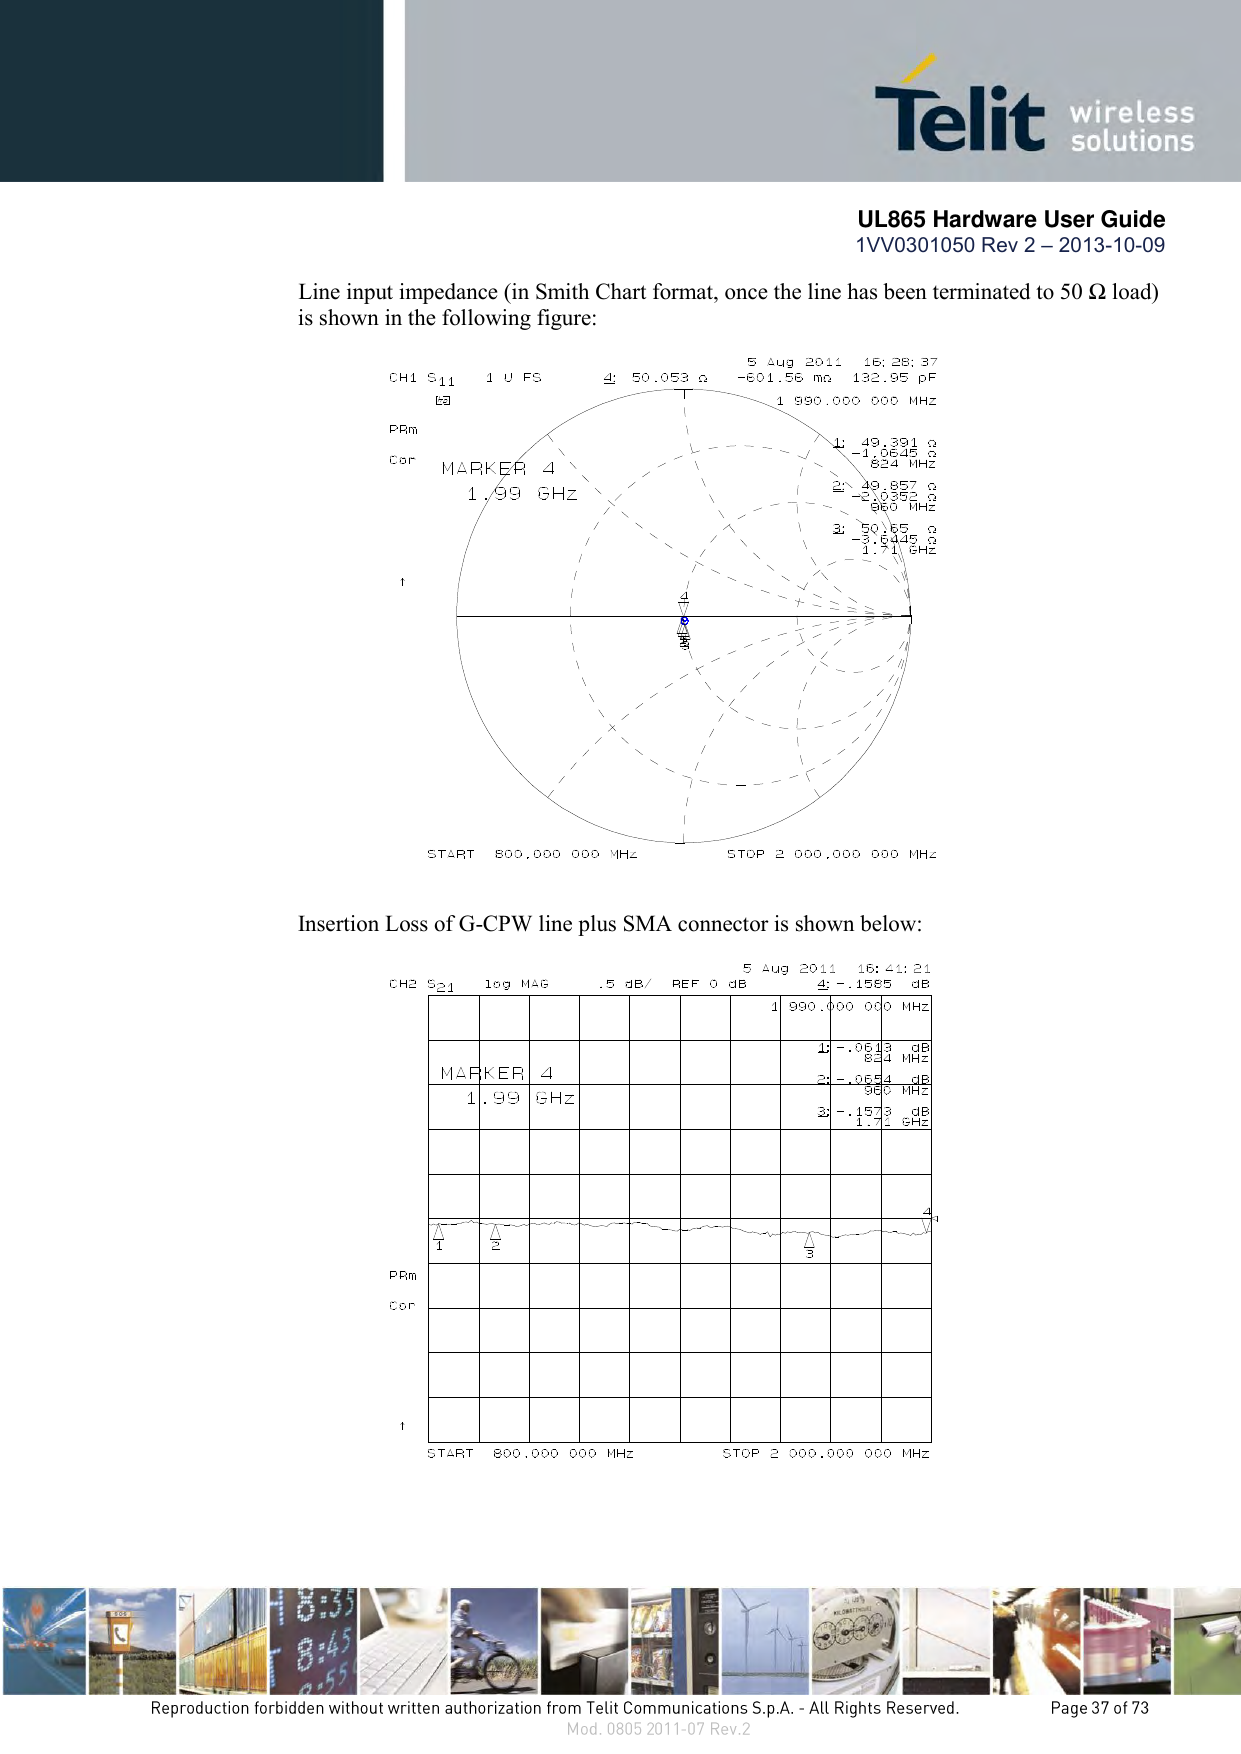       UL865 Hardware User Guide 1VV0301050 Rev 2 – 2013-10-09   Line input impedance (in Smith Chart format, once the line has been terminated to 50 Ω load) is shown in the following figure:                       Insertion Loss of G-CPW line plus SMA connector is shown below:                  